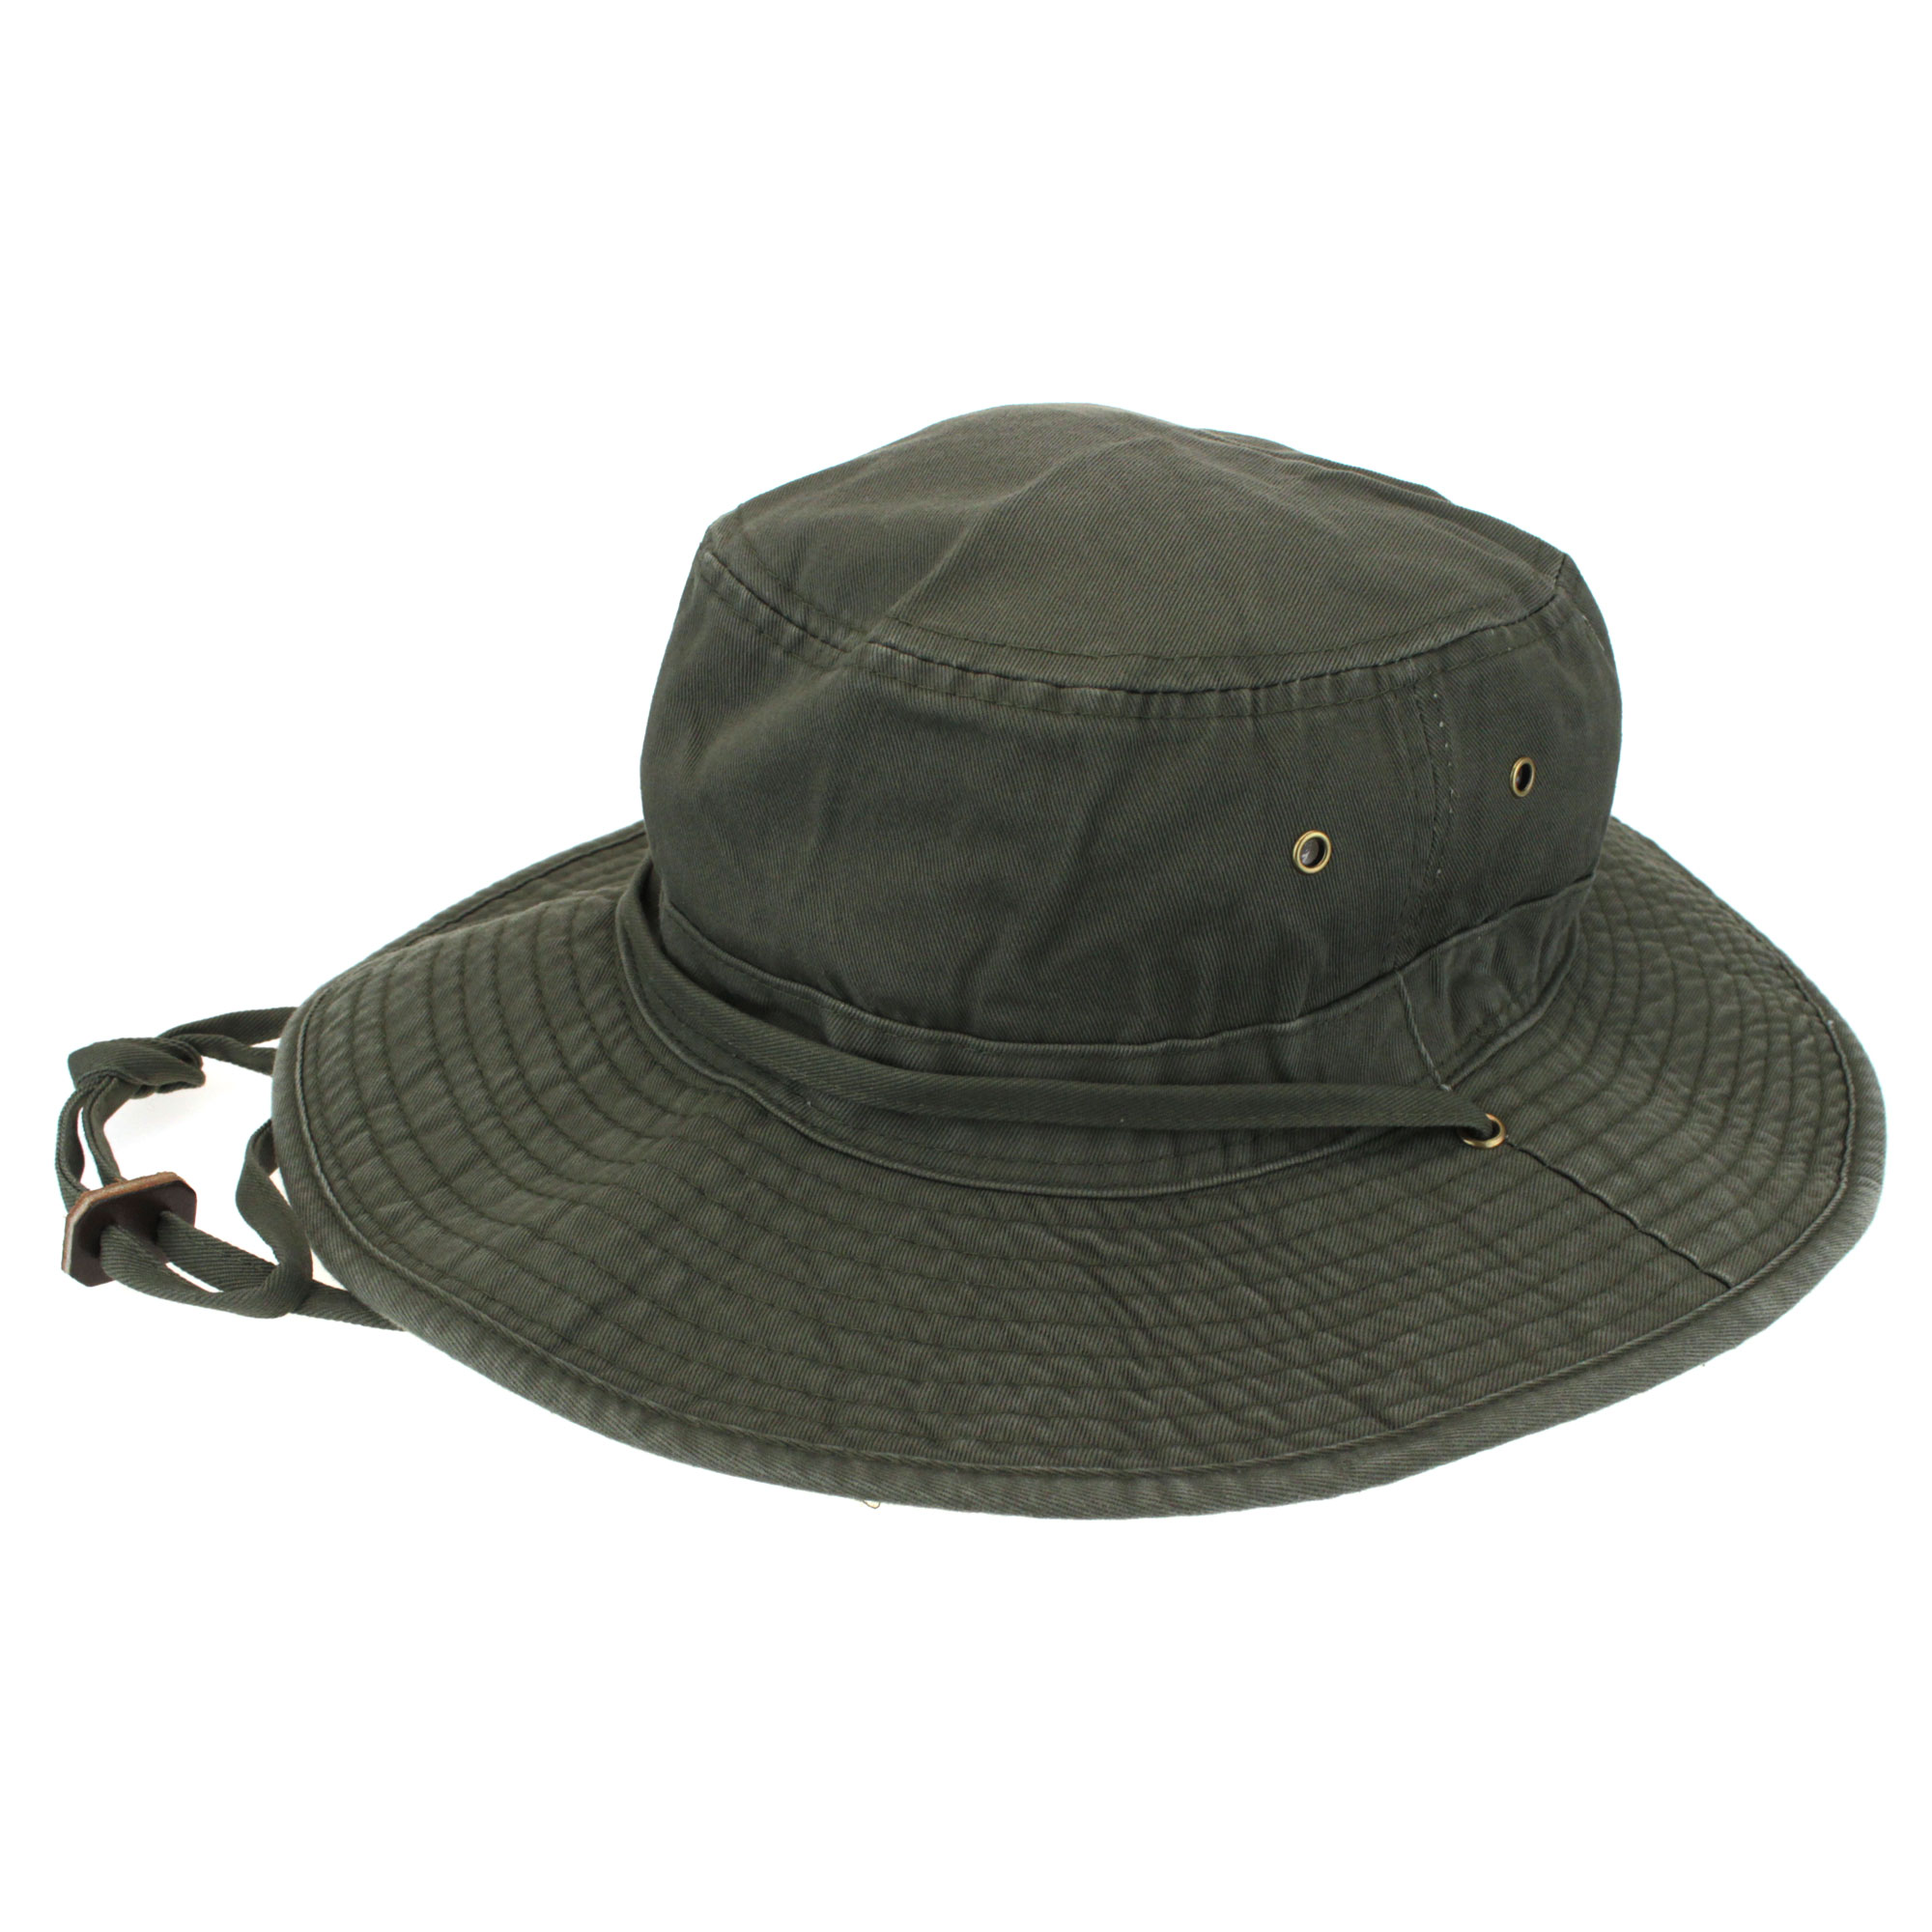 Classic Mens Fishermans Cotton Twill Bucket Hat Army Green Small 7-18